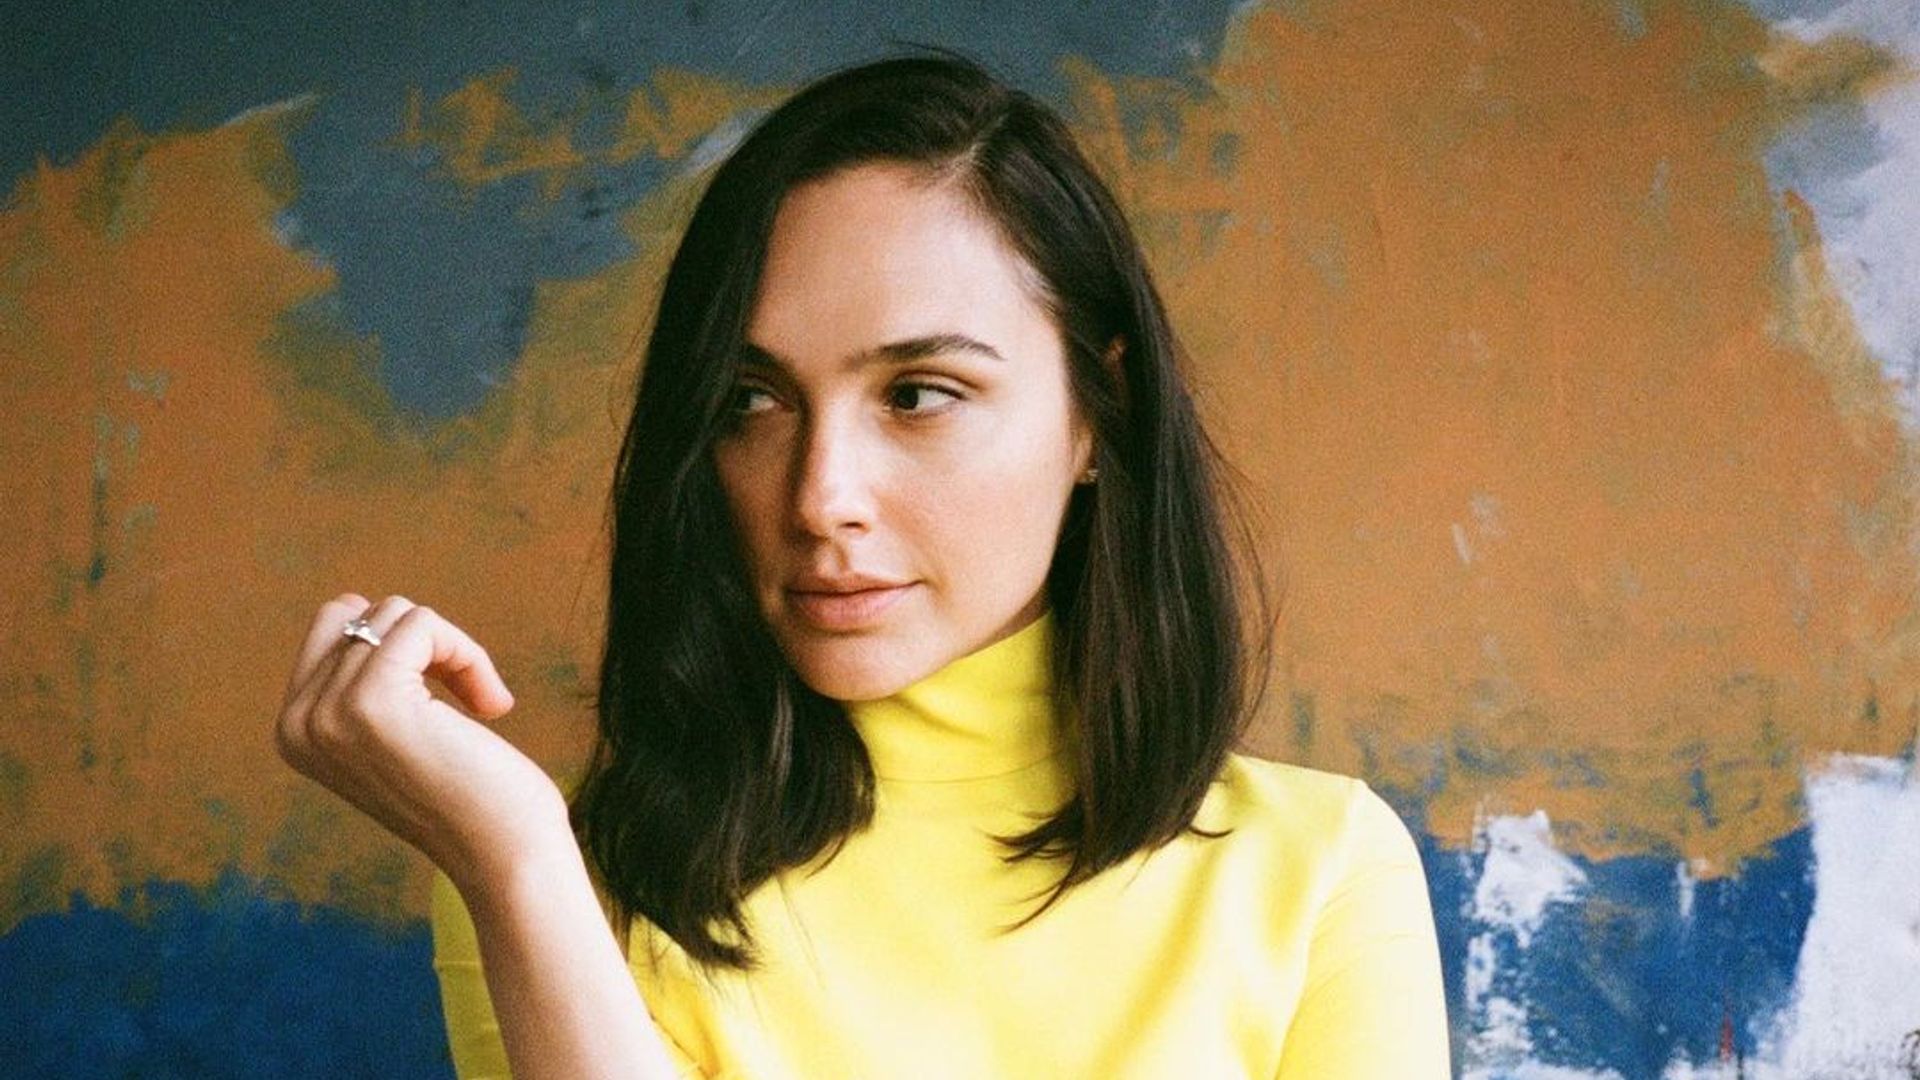 Gal Gadot looks incredible in a yellow feathered dress